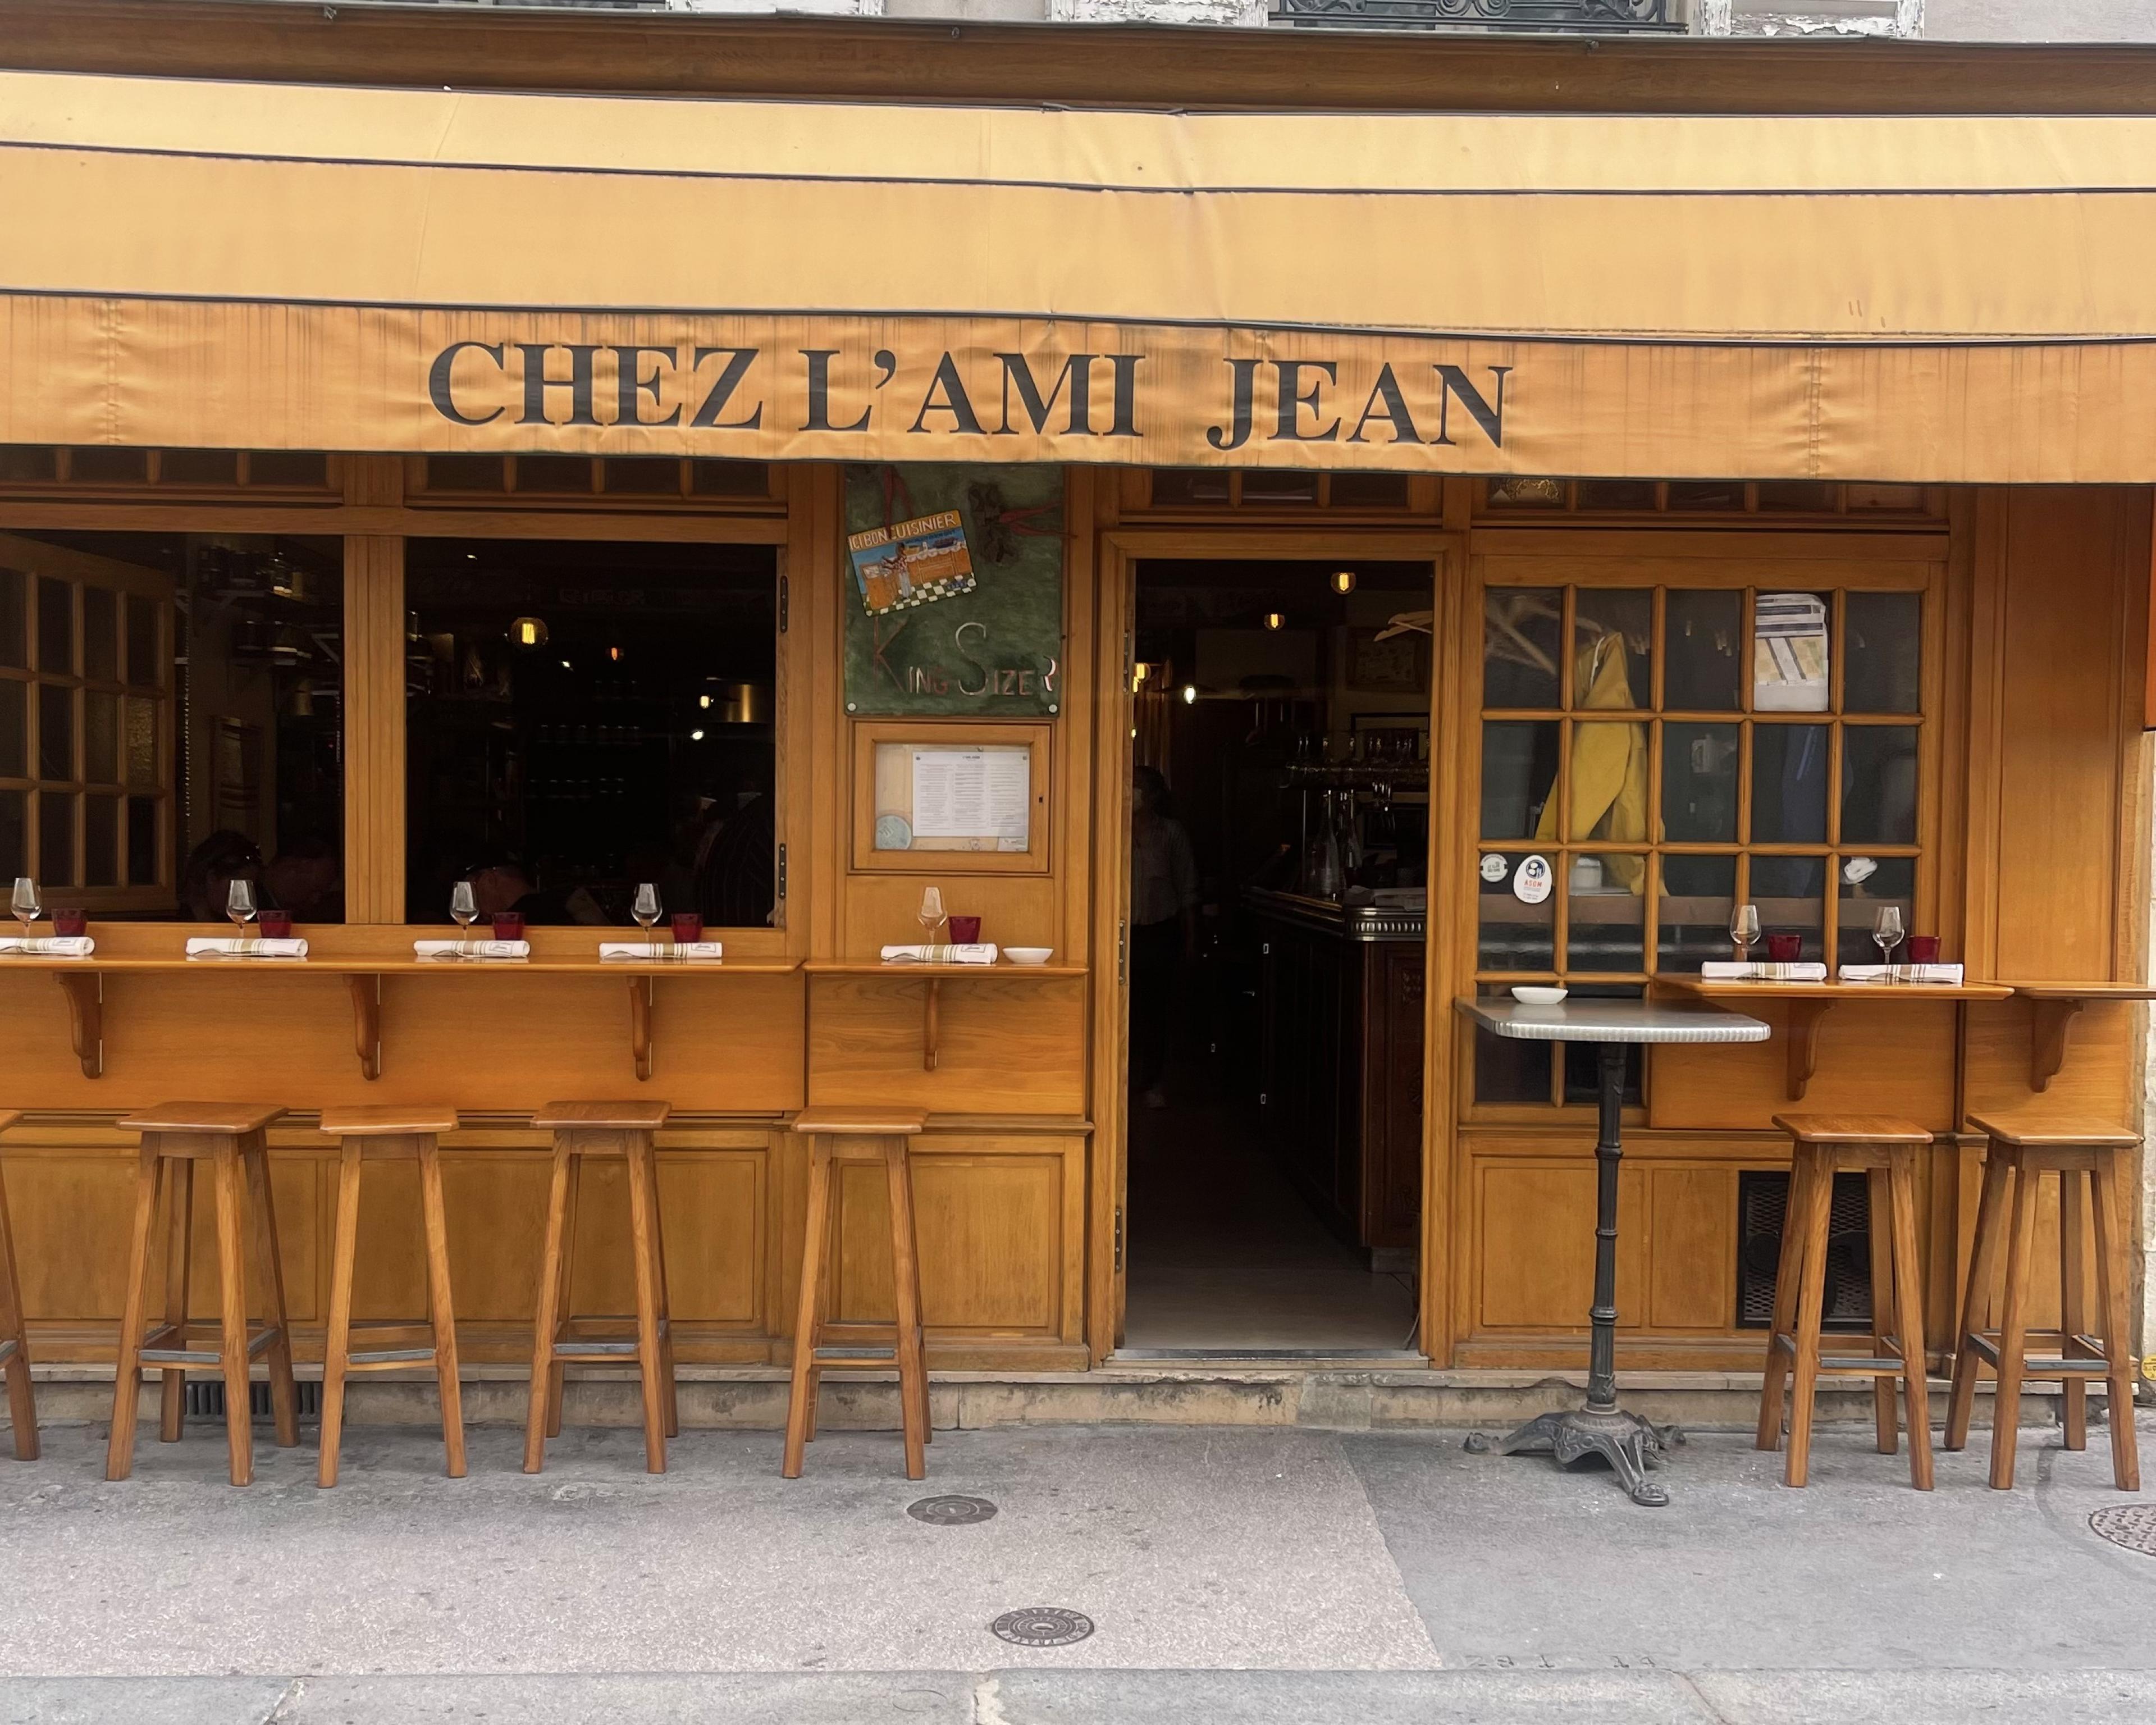 Restaurant with orange awning saying Chez L'Ami Jean with bar stools arranged in front of exterior windows so diners could eat at counters on exterior orange wall